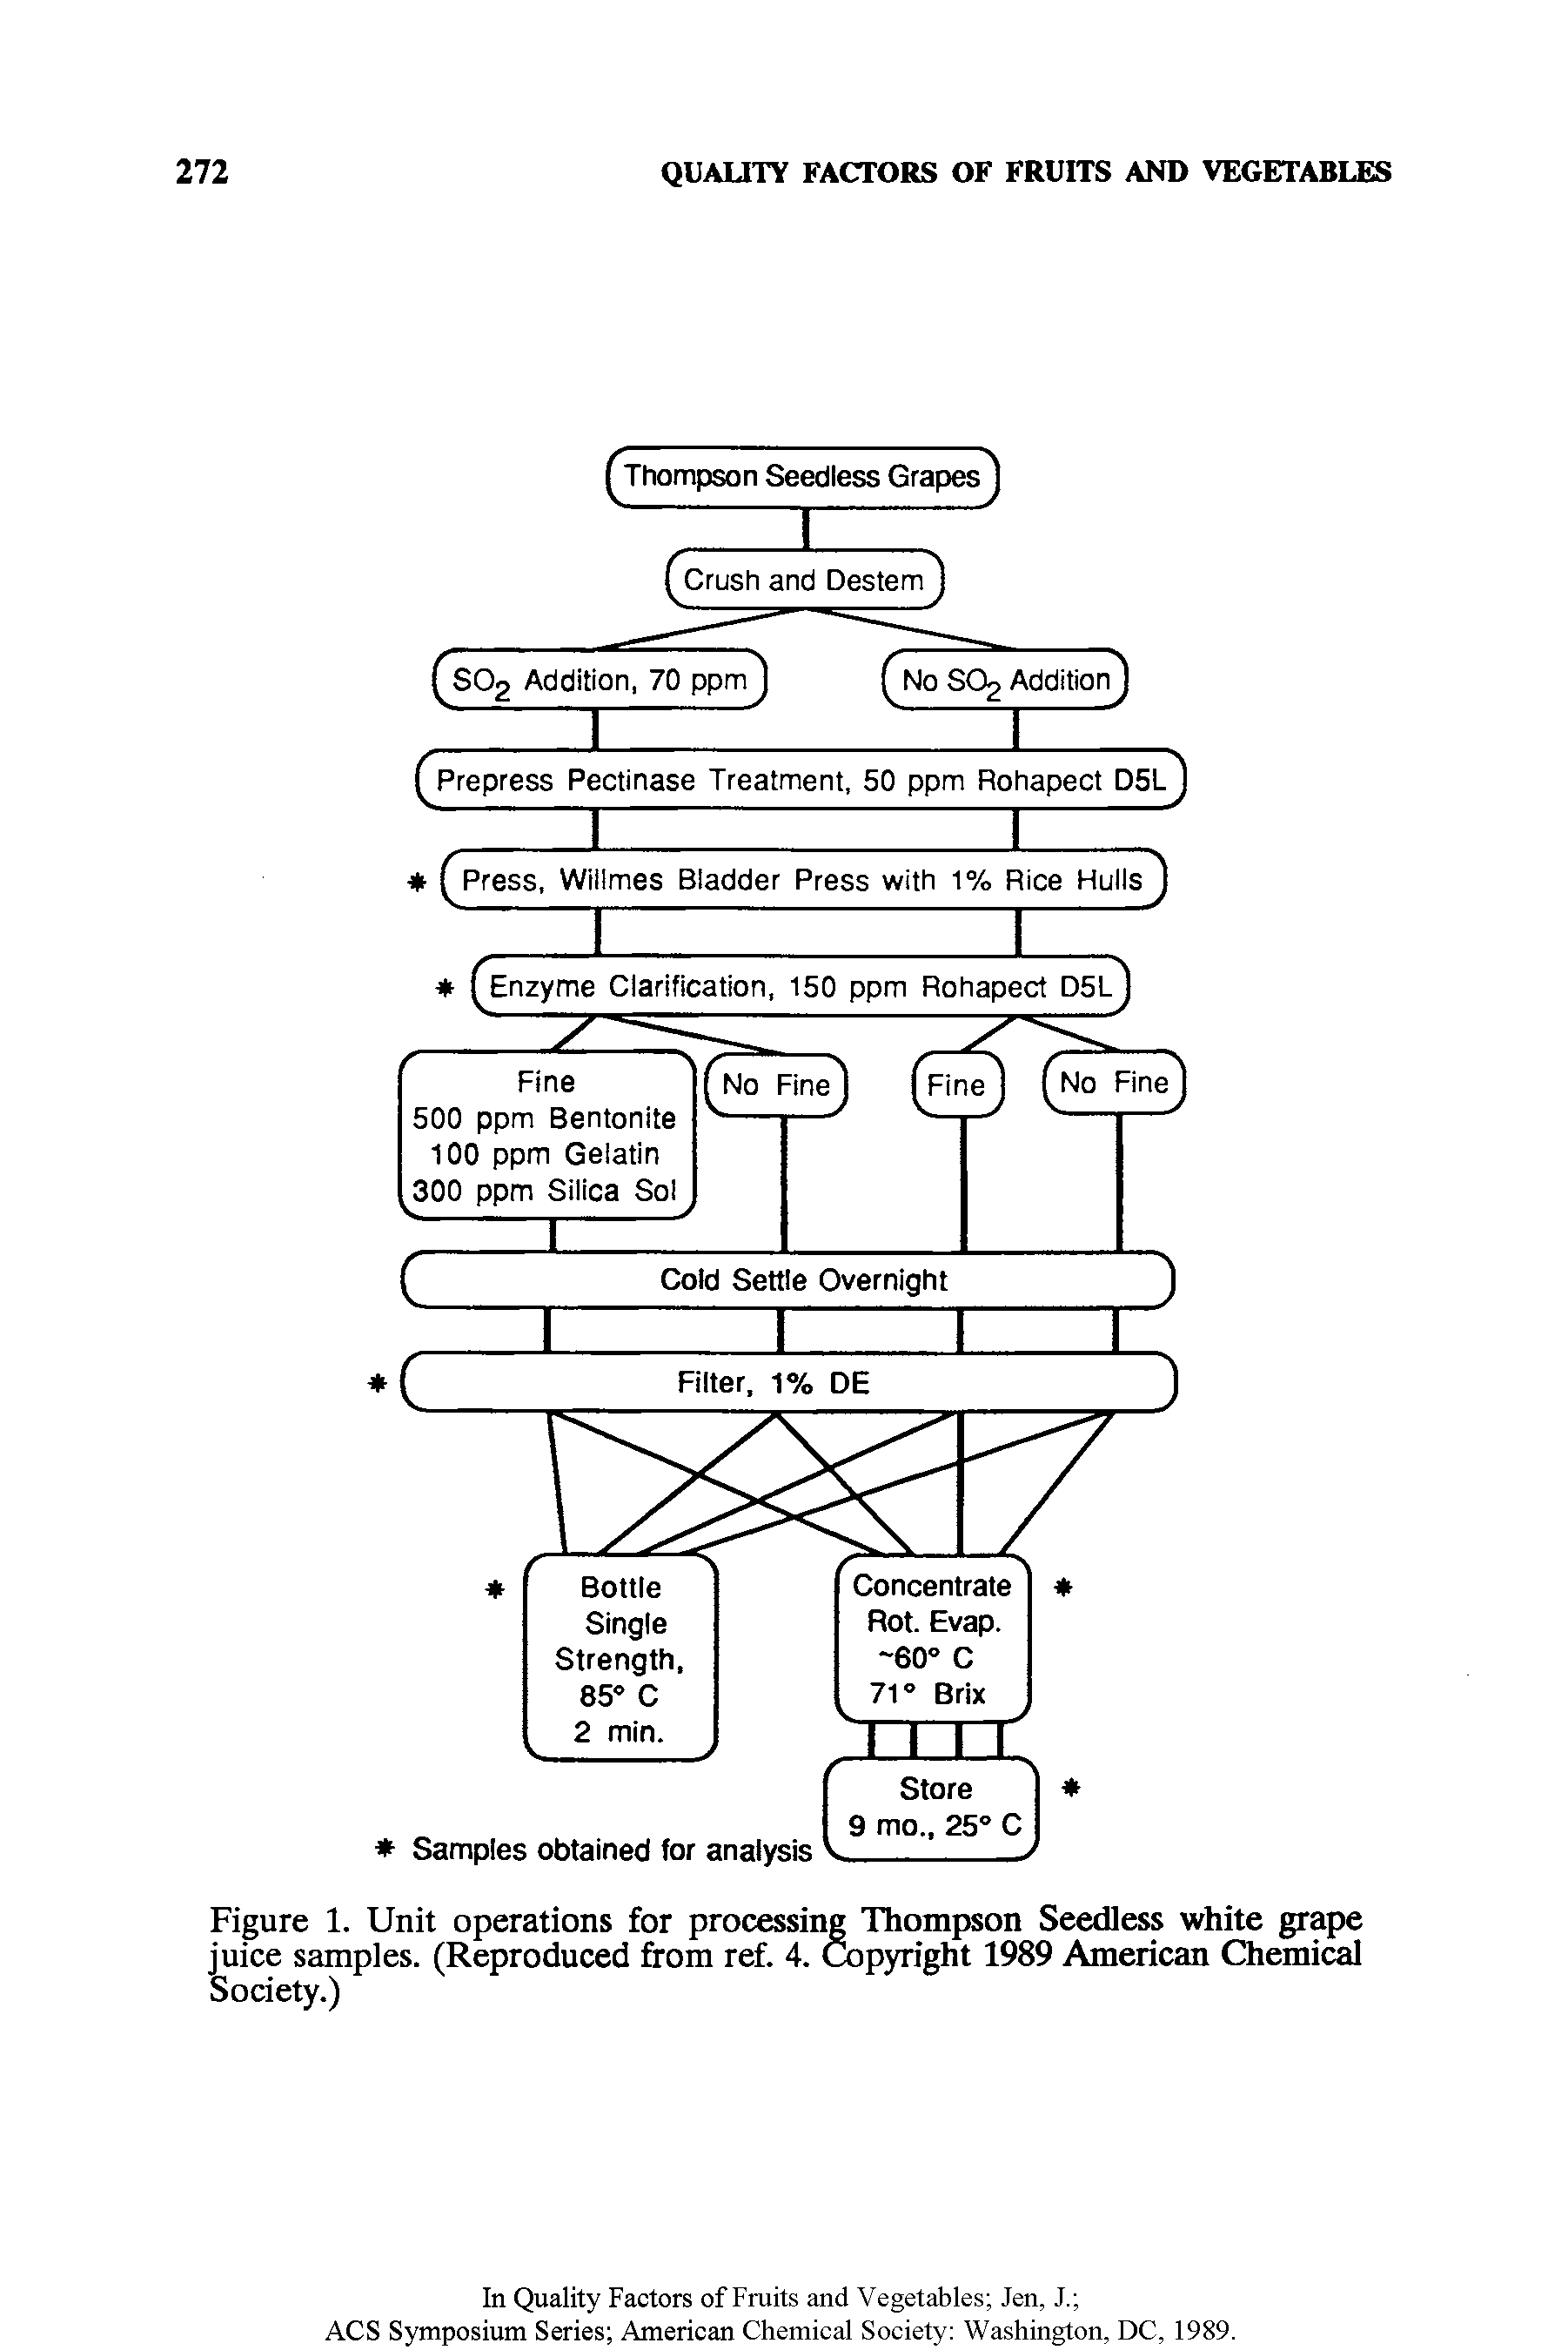 Figure 1. Unit operations for processing Thompson Seedless white grape juice samples. (Reproduced from ref. 4. Copyright 1989 American Chemical Society.)...